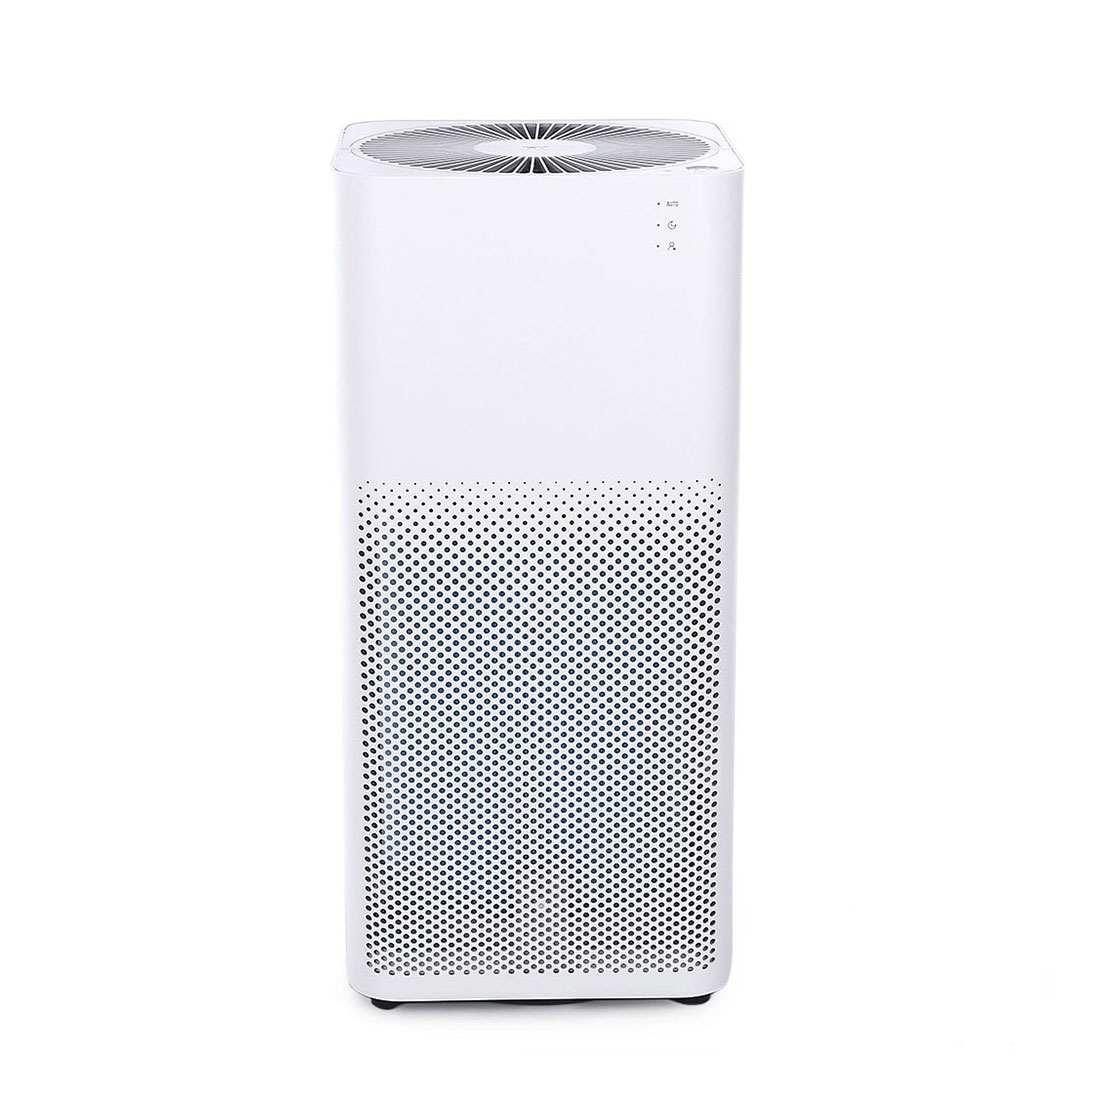 

Xiaomi Mi Air Purifier 2 Sterilizer Addition to Formaldehyde Purifiers Air Cleaning Intelligent Household Hepa Filter with APP Remote Control